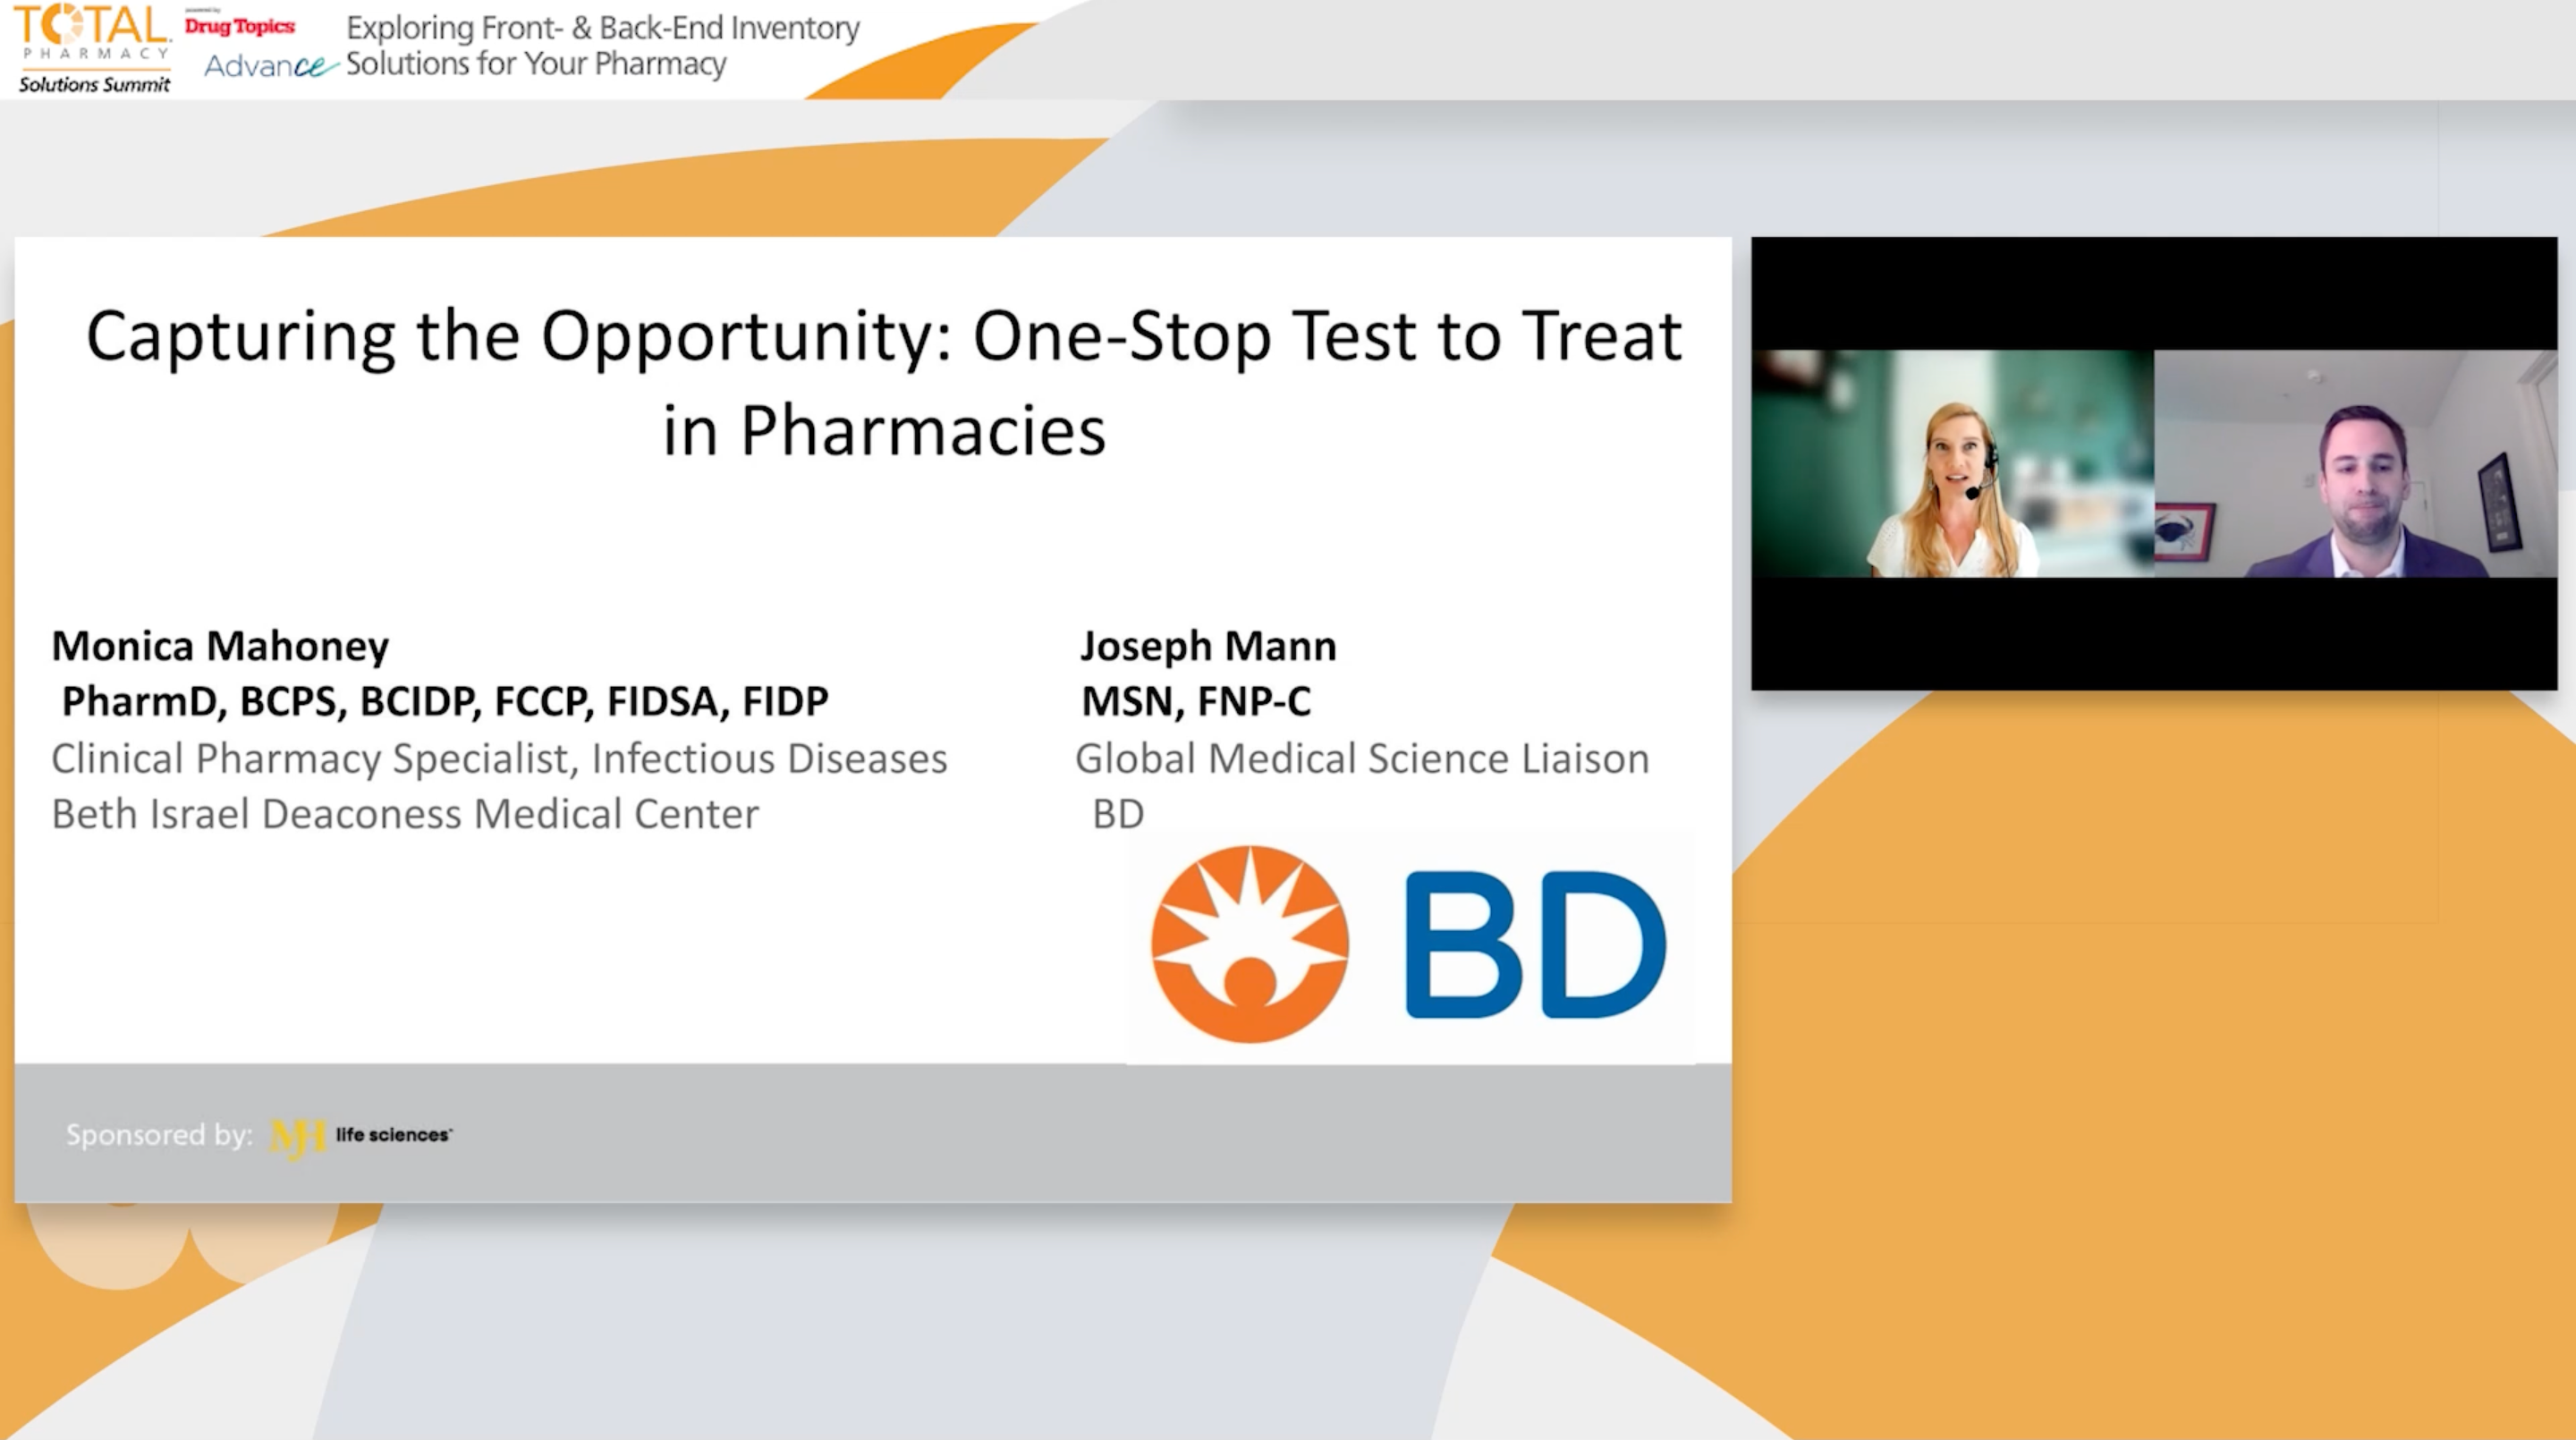 Turning Pharmacies into a One-Stop Testing and Prescribing Shop